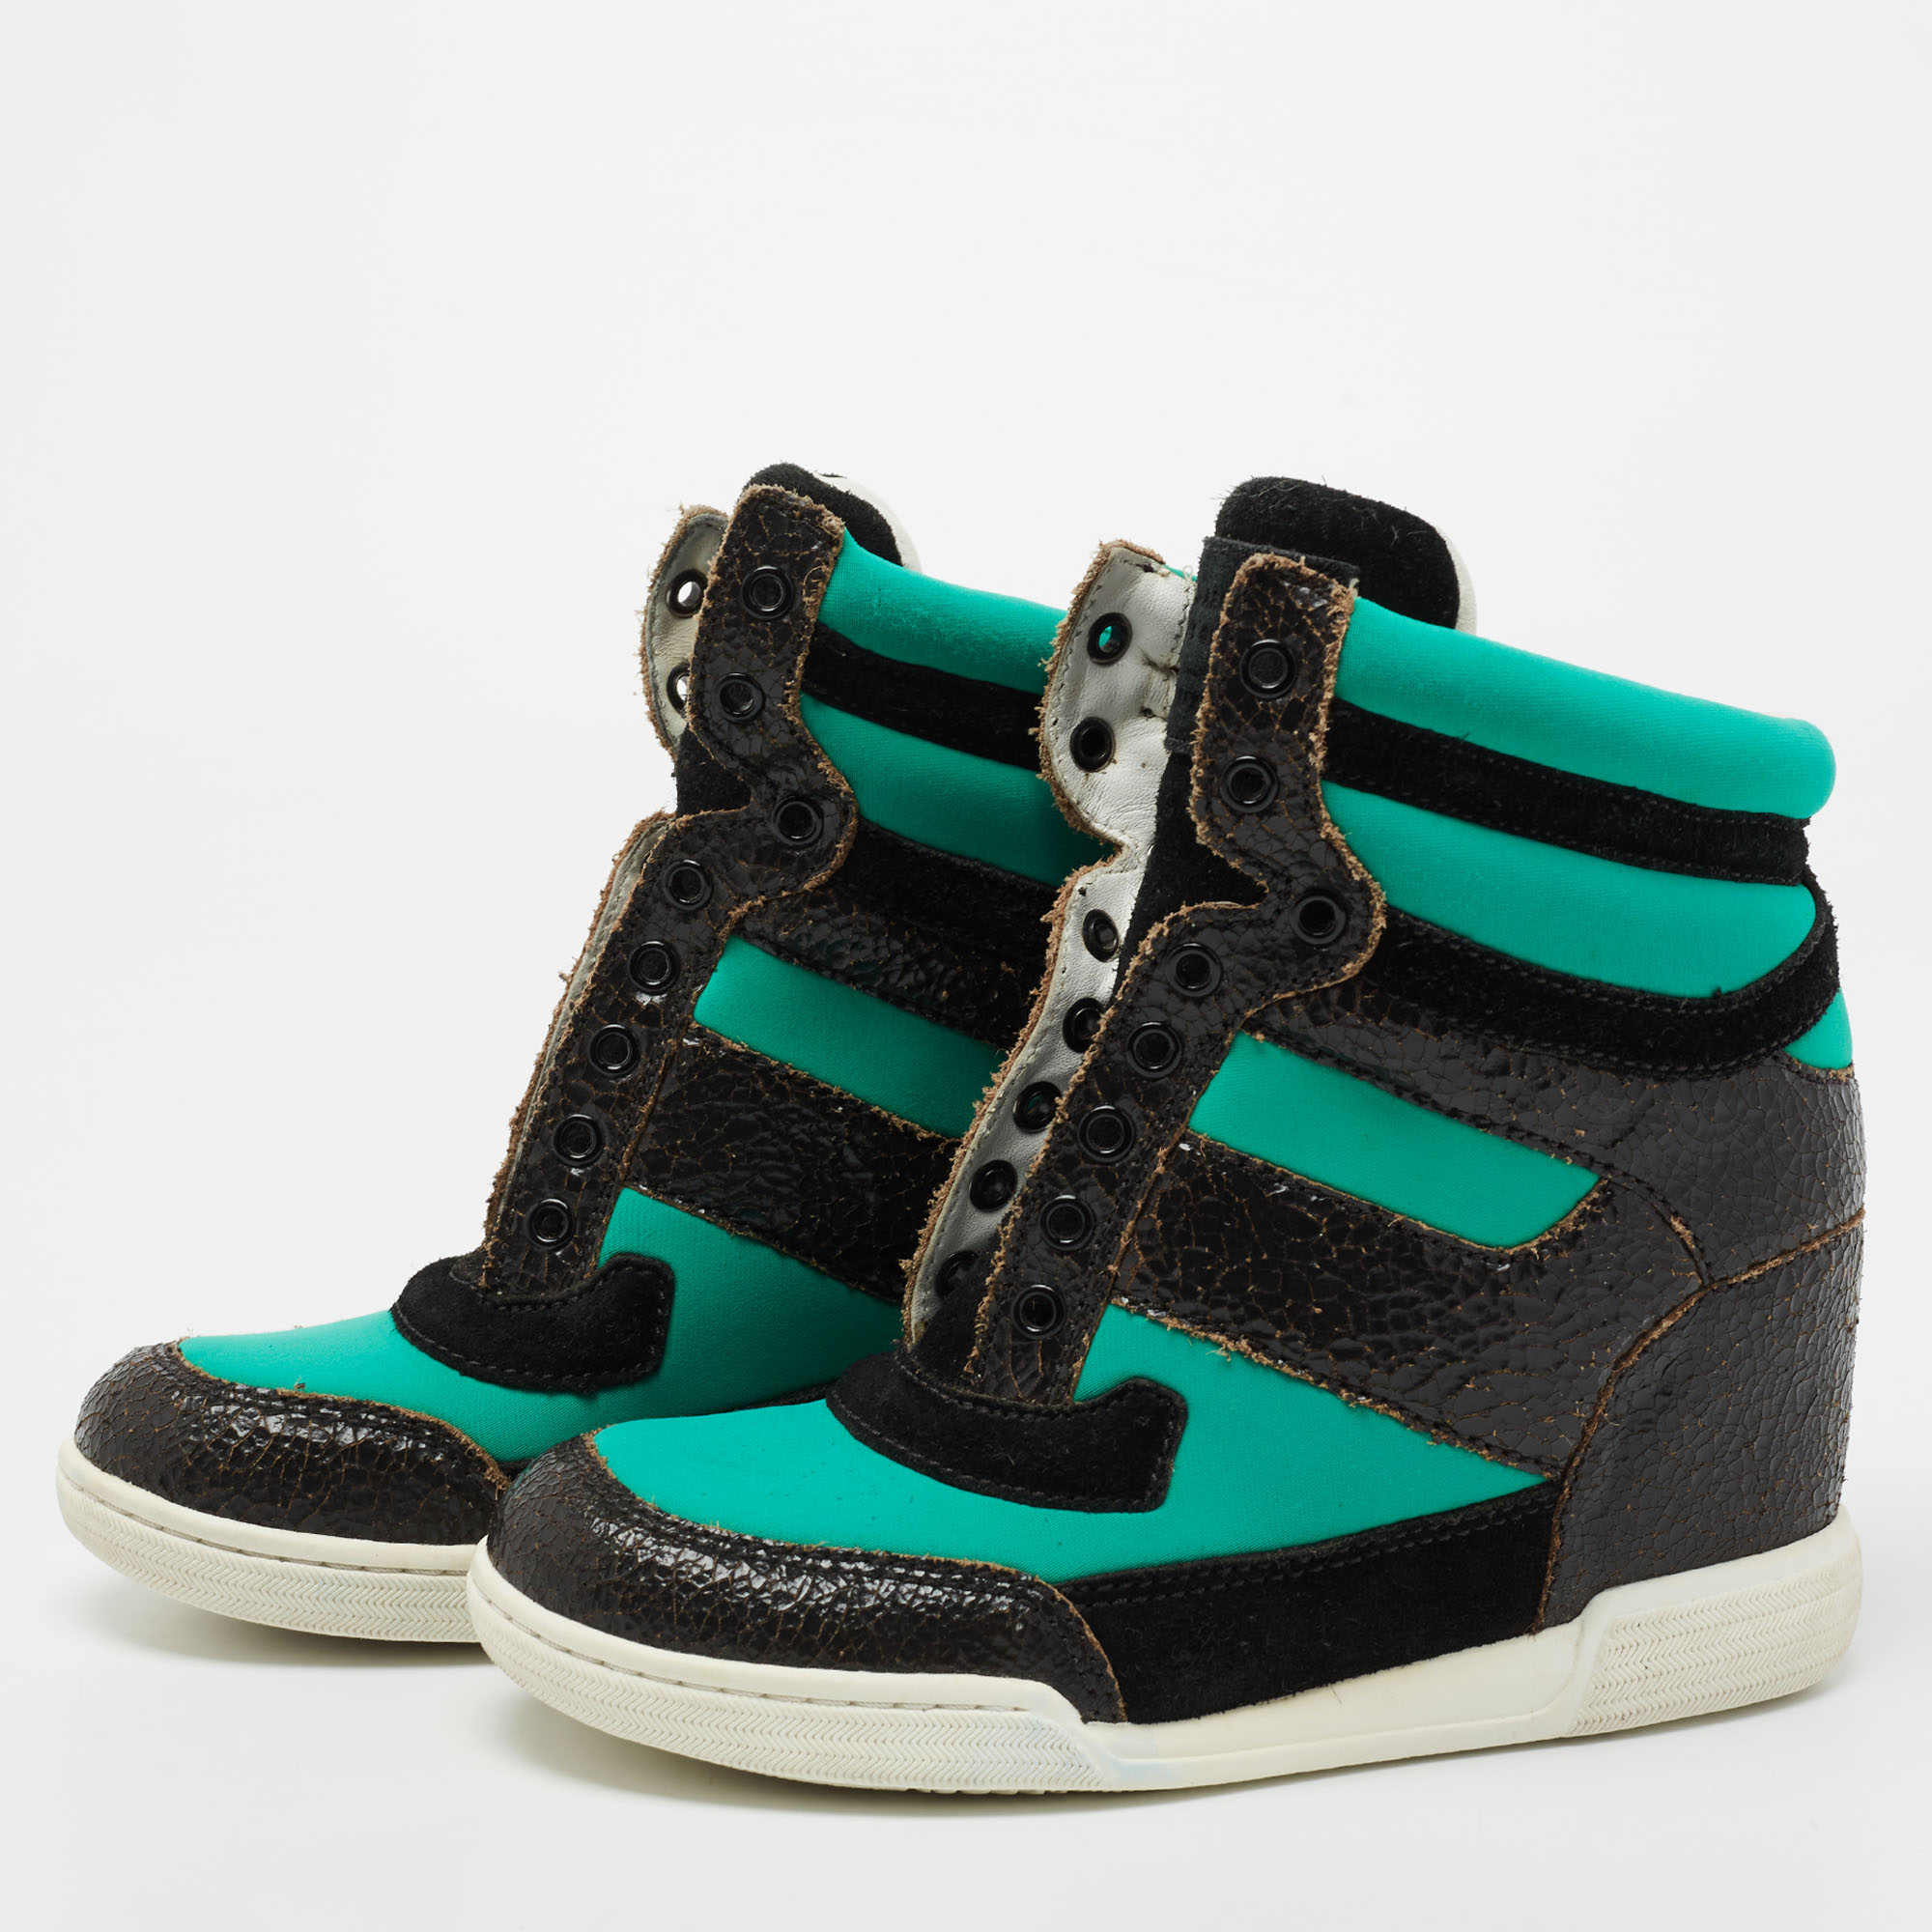 

Marc by Marc Jacobs Tri Color Neoprene, Leather and Suede High-Top Wedge Sneakers Size, Green